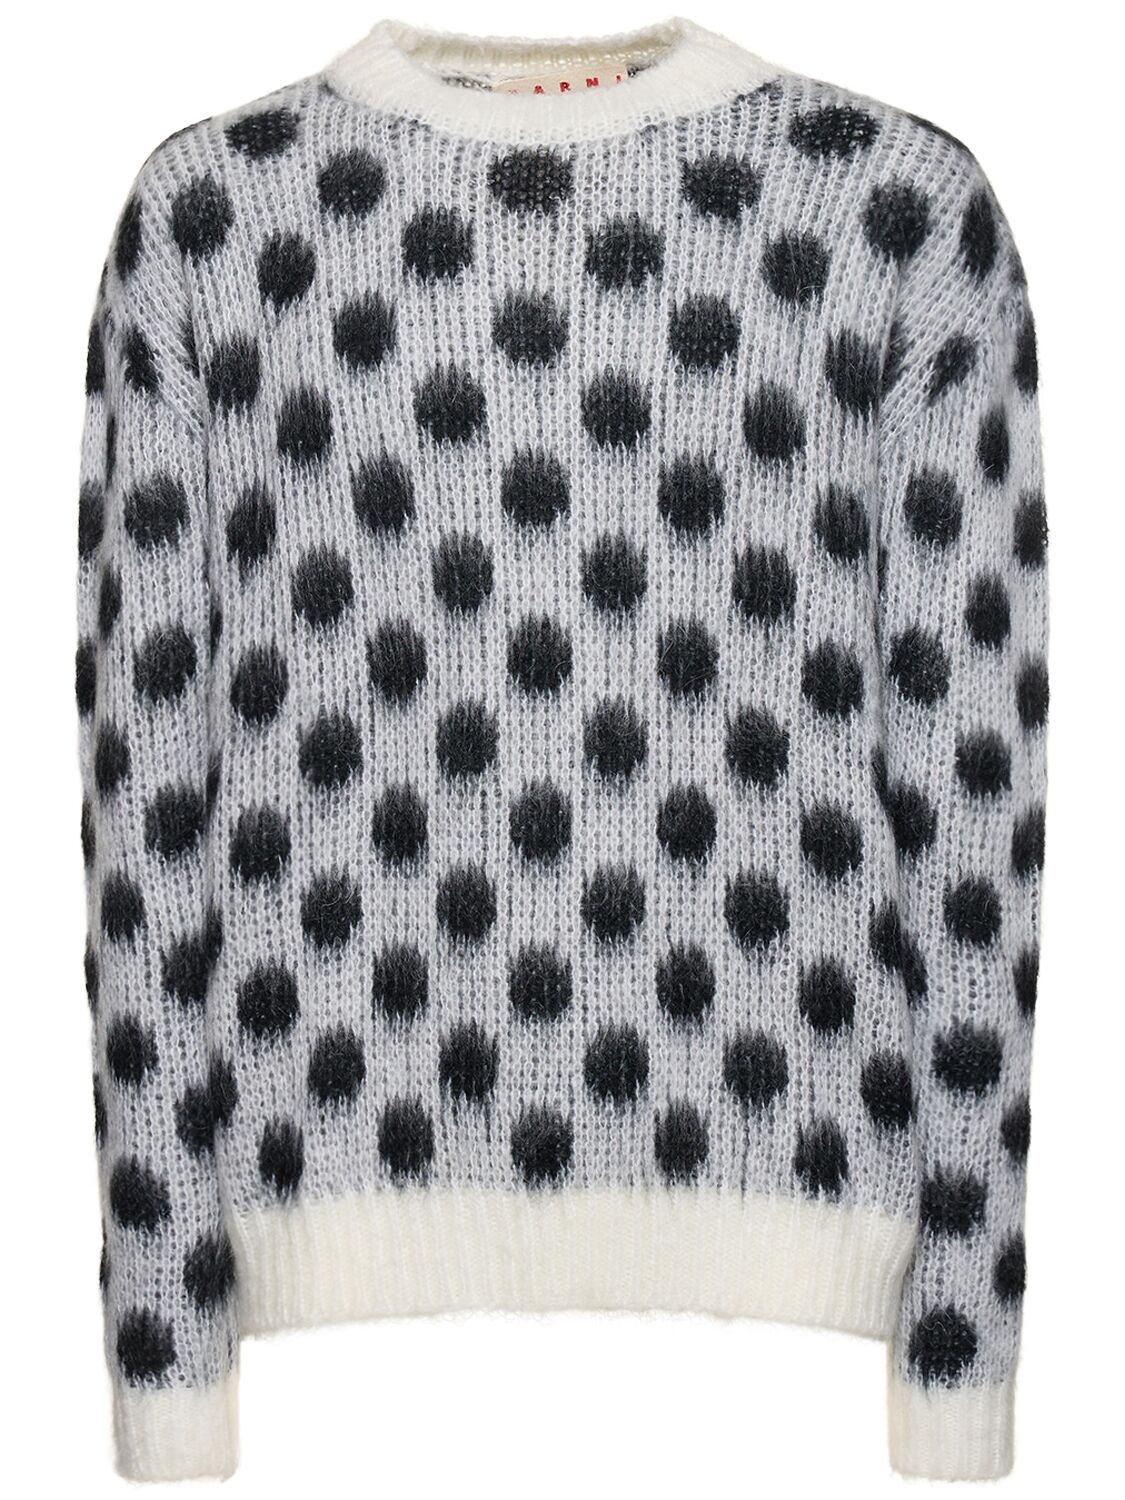 MARNI CHECK BRUSHED MOHAIR BLEND KNIT SWEATER